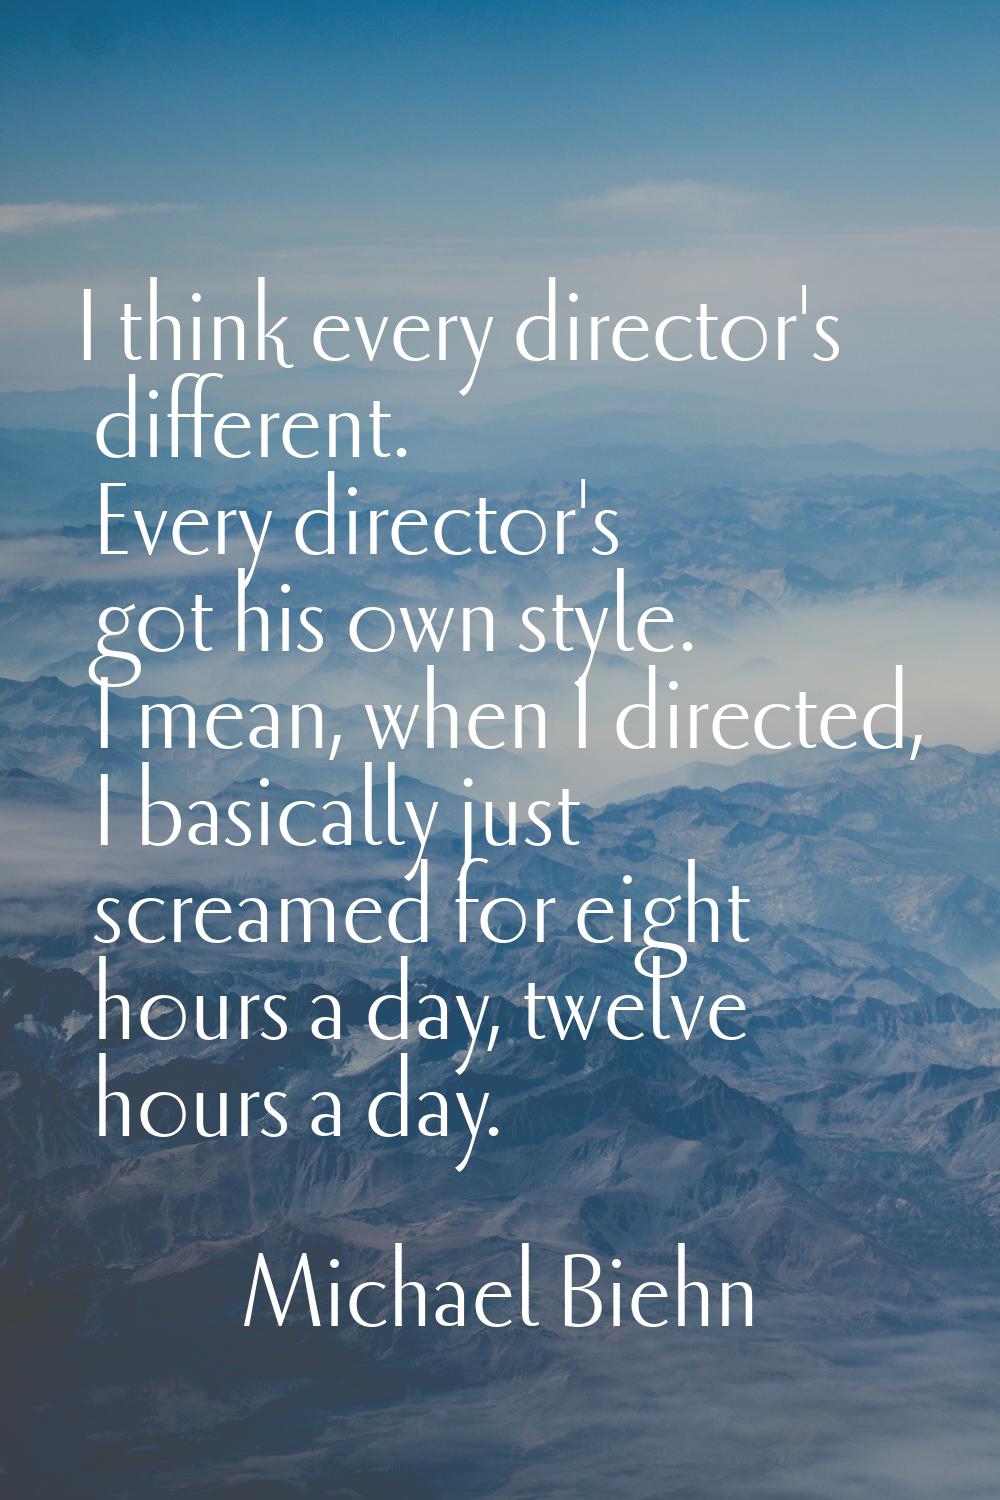 I think every director's different. Every director's got his own style. I mean, when I directed, I 